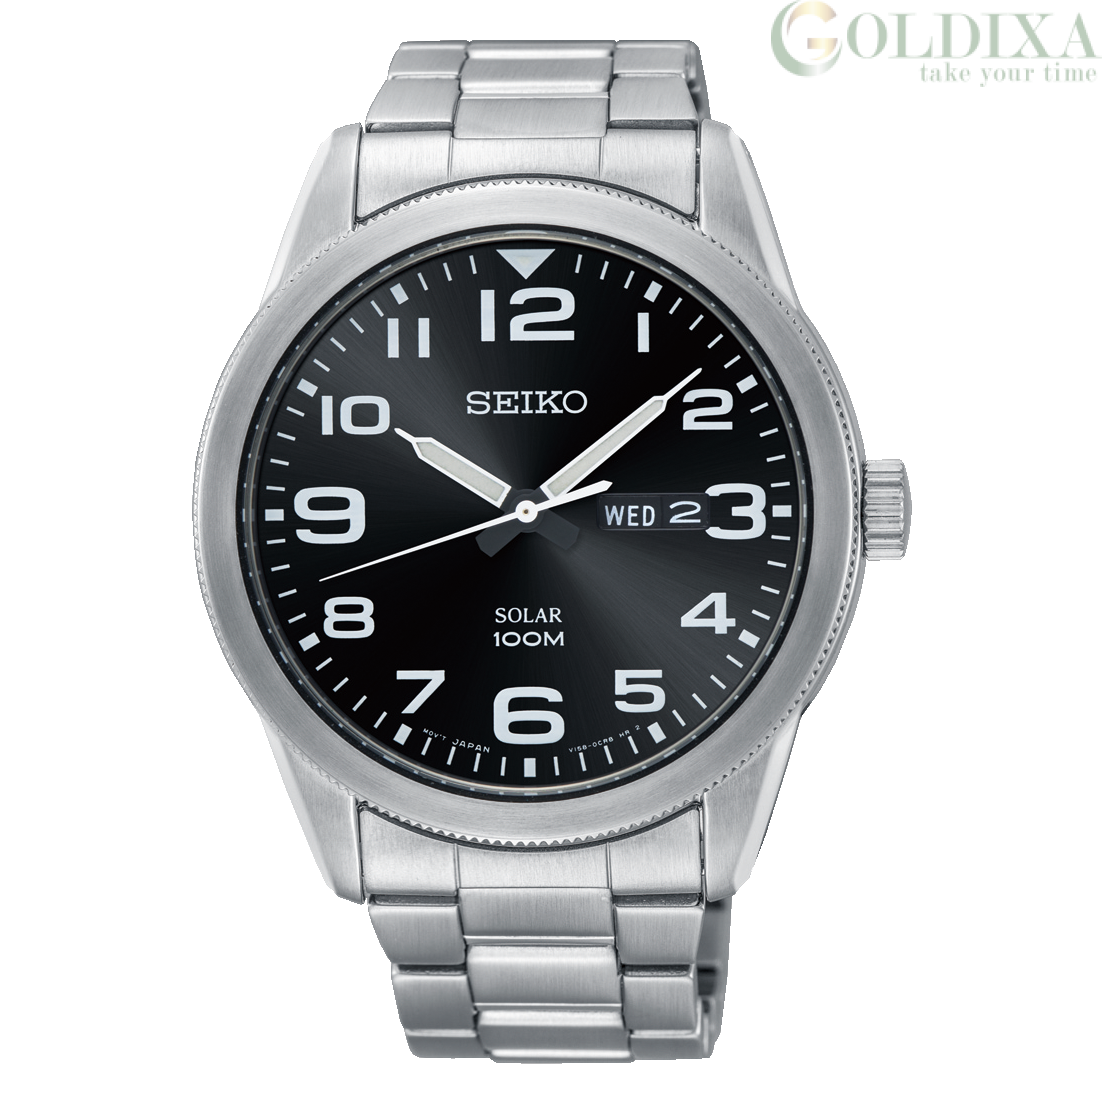 Watches: Seiko SNE471P1 watch with solar charge for men